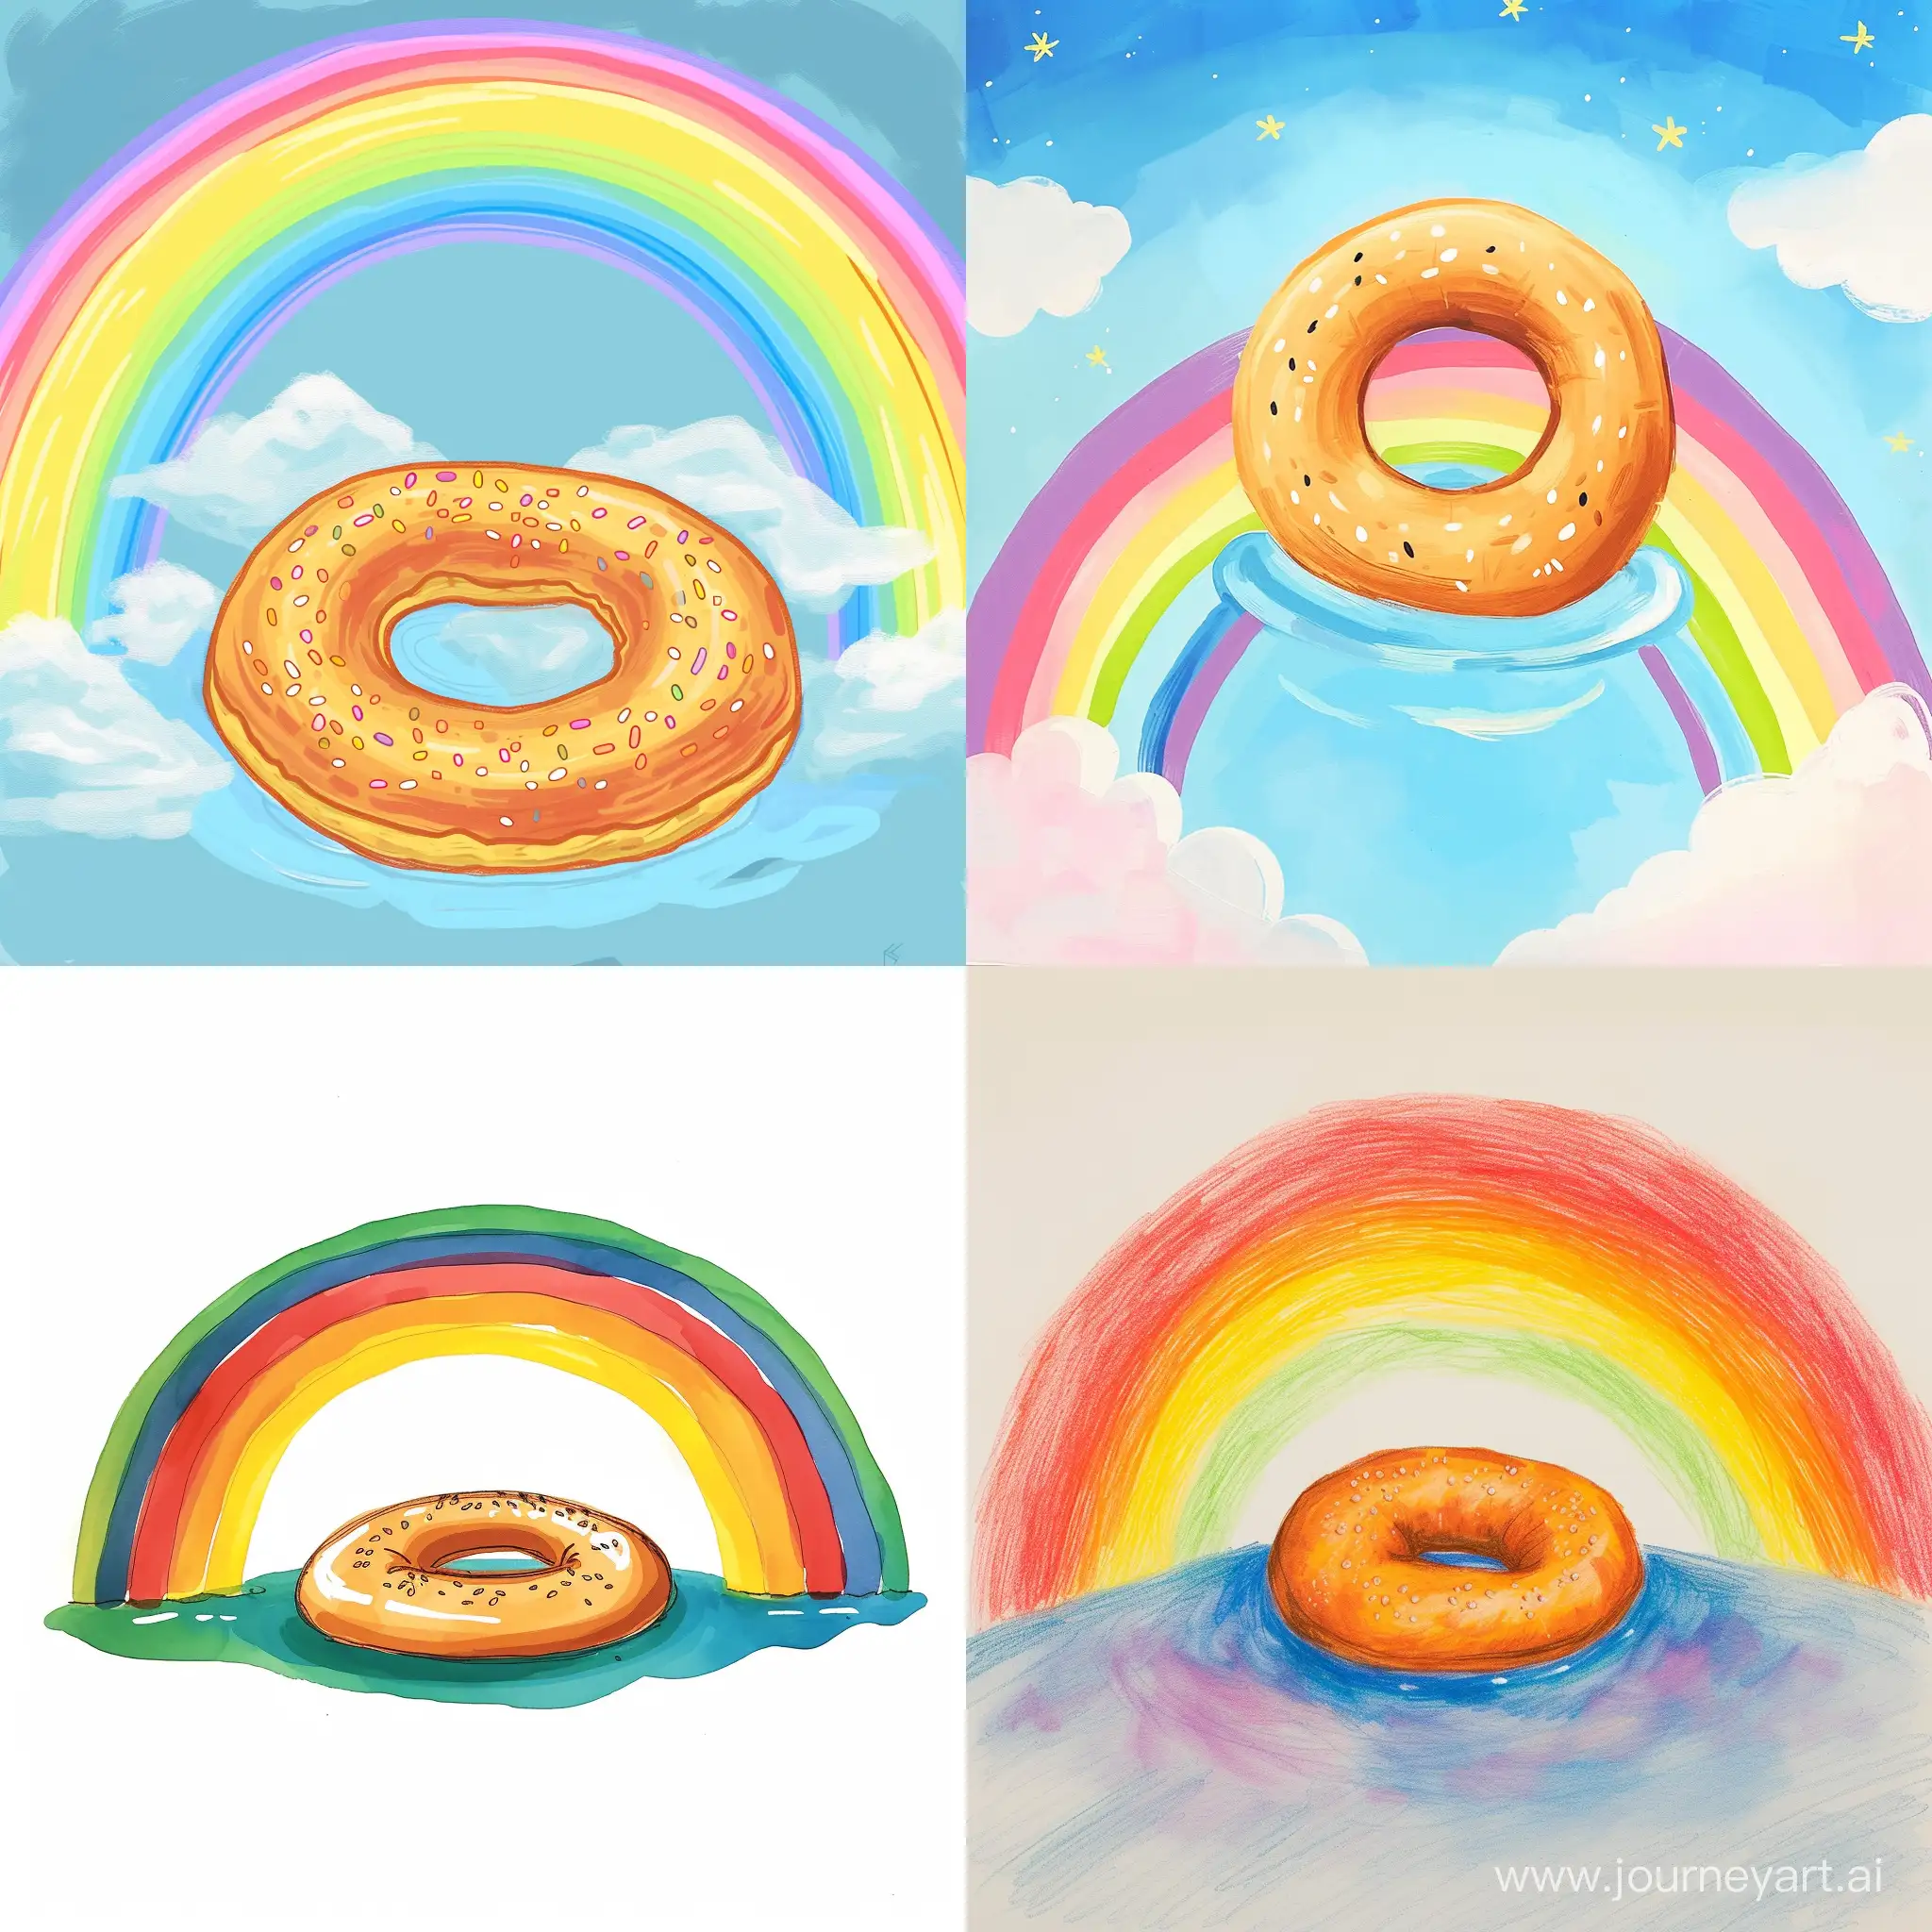 Colorful-Floating-Bagel-in-a-Vibrant-Rainbow